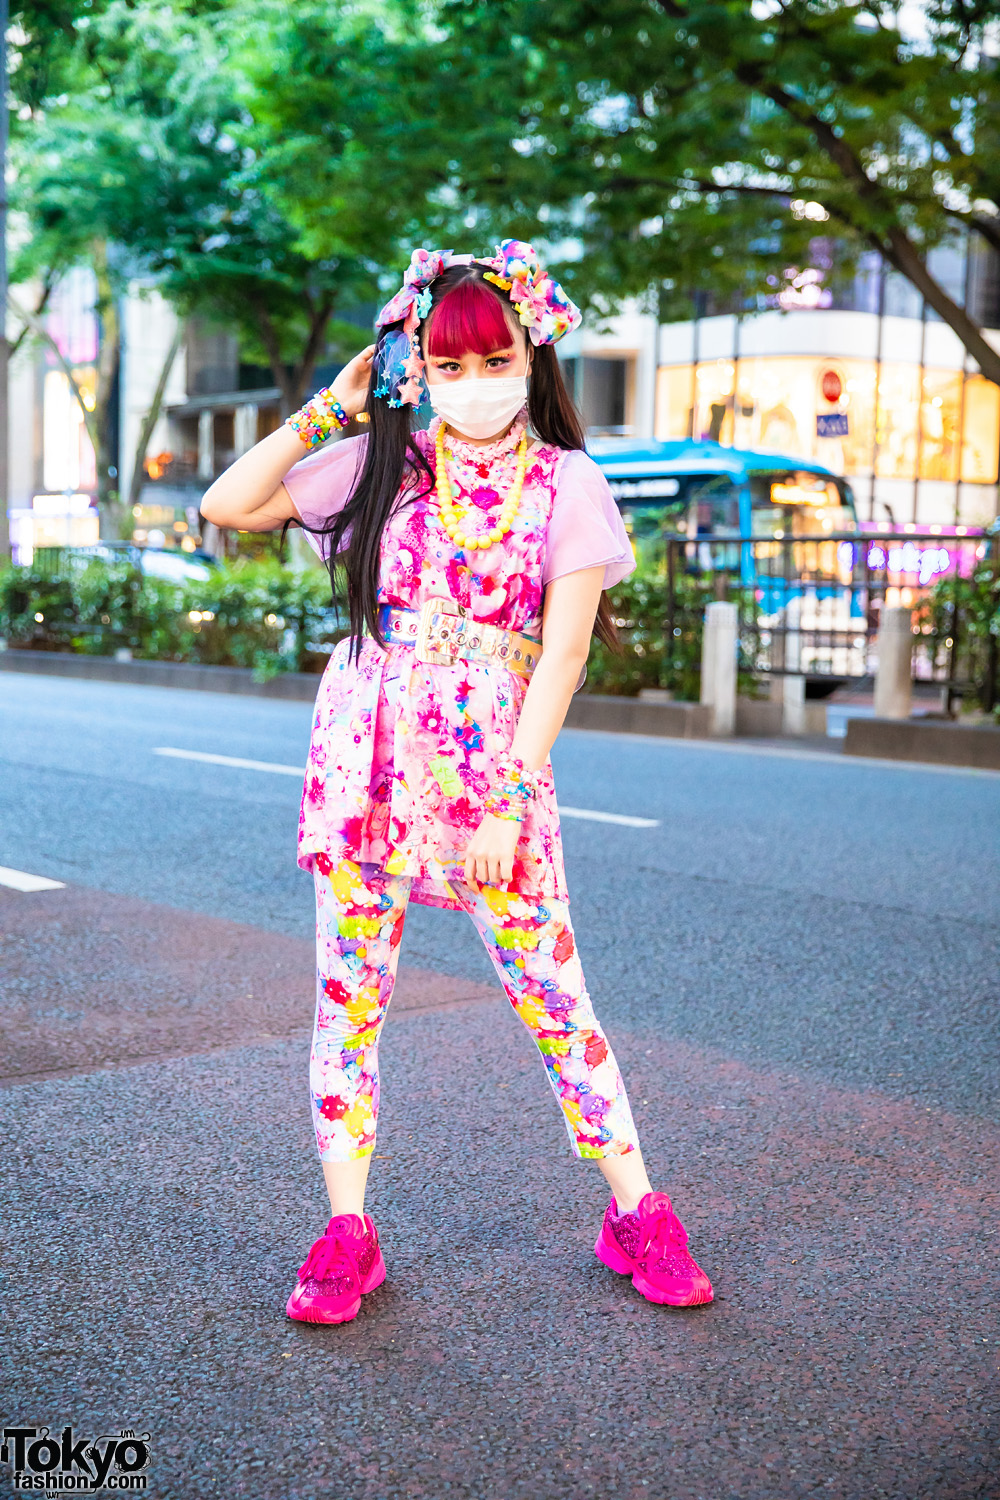 Pink Decora Fashion w/ Twin Tails, Hair Clips, 6%DOKIDOKI Printed Top and Pants, 6%DOKIDOKI Accessories & Adidas Sneakers